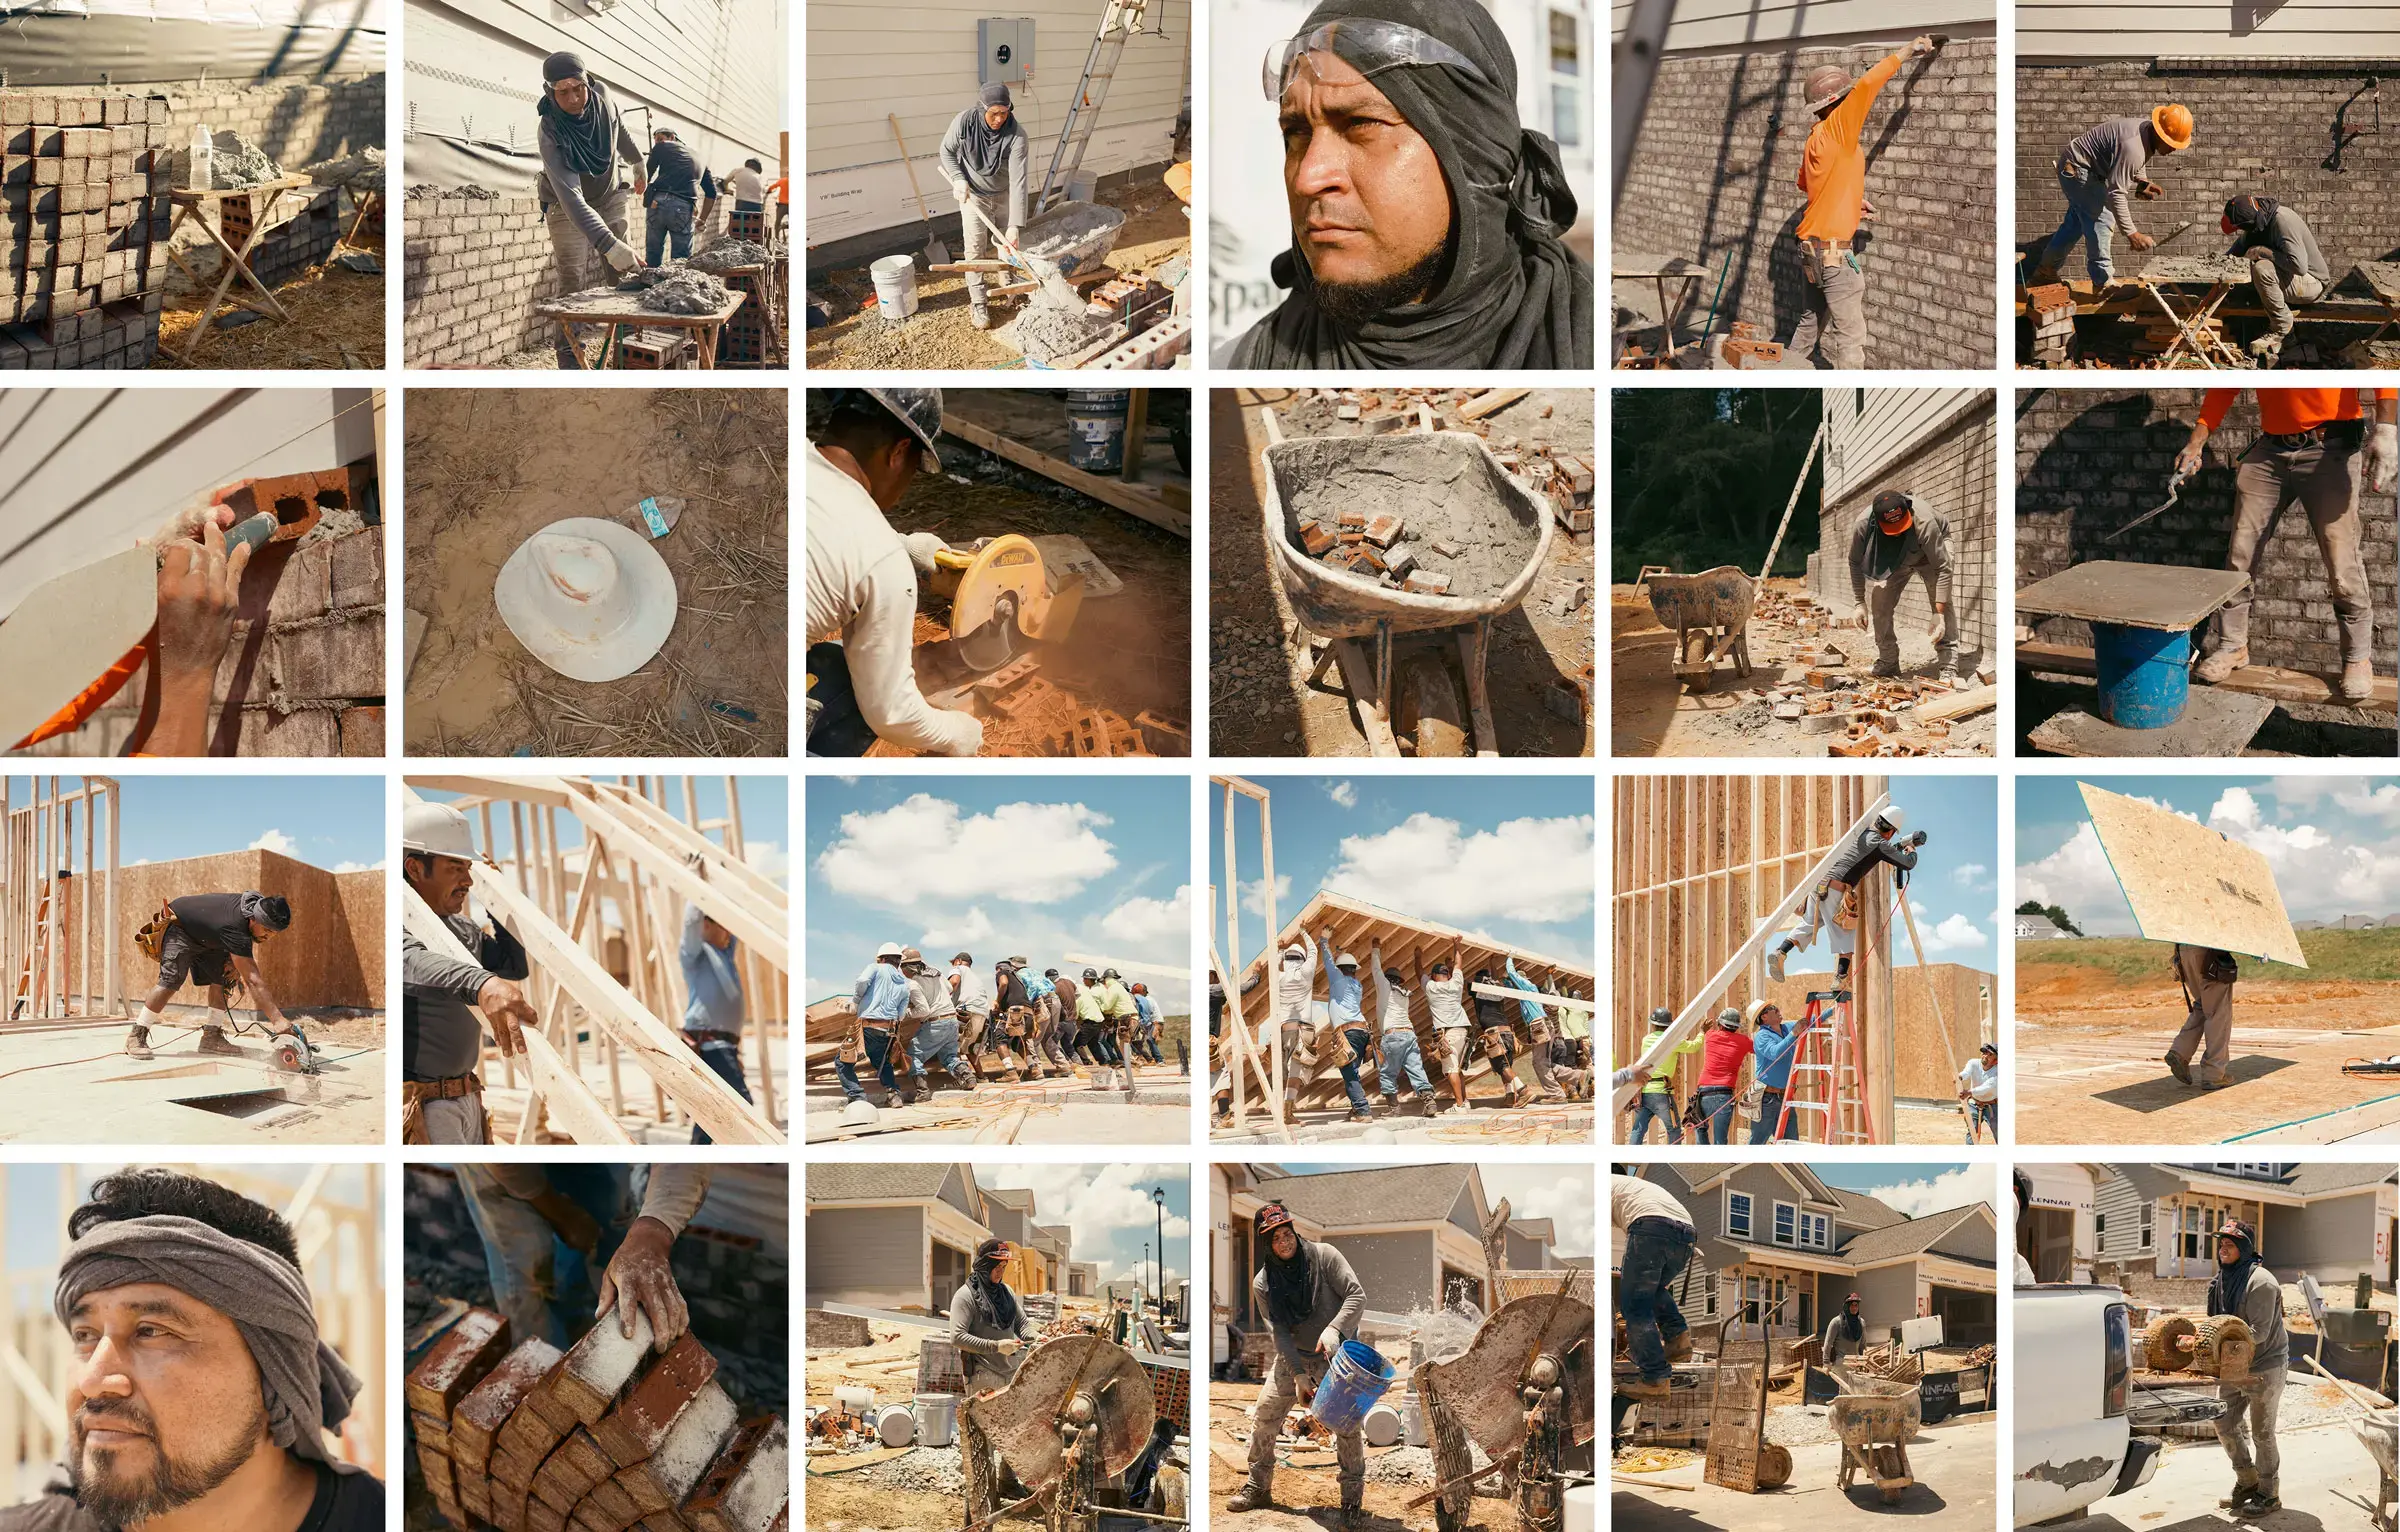 A collage of construction workers doing manual labor during extreme heat conditions.